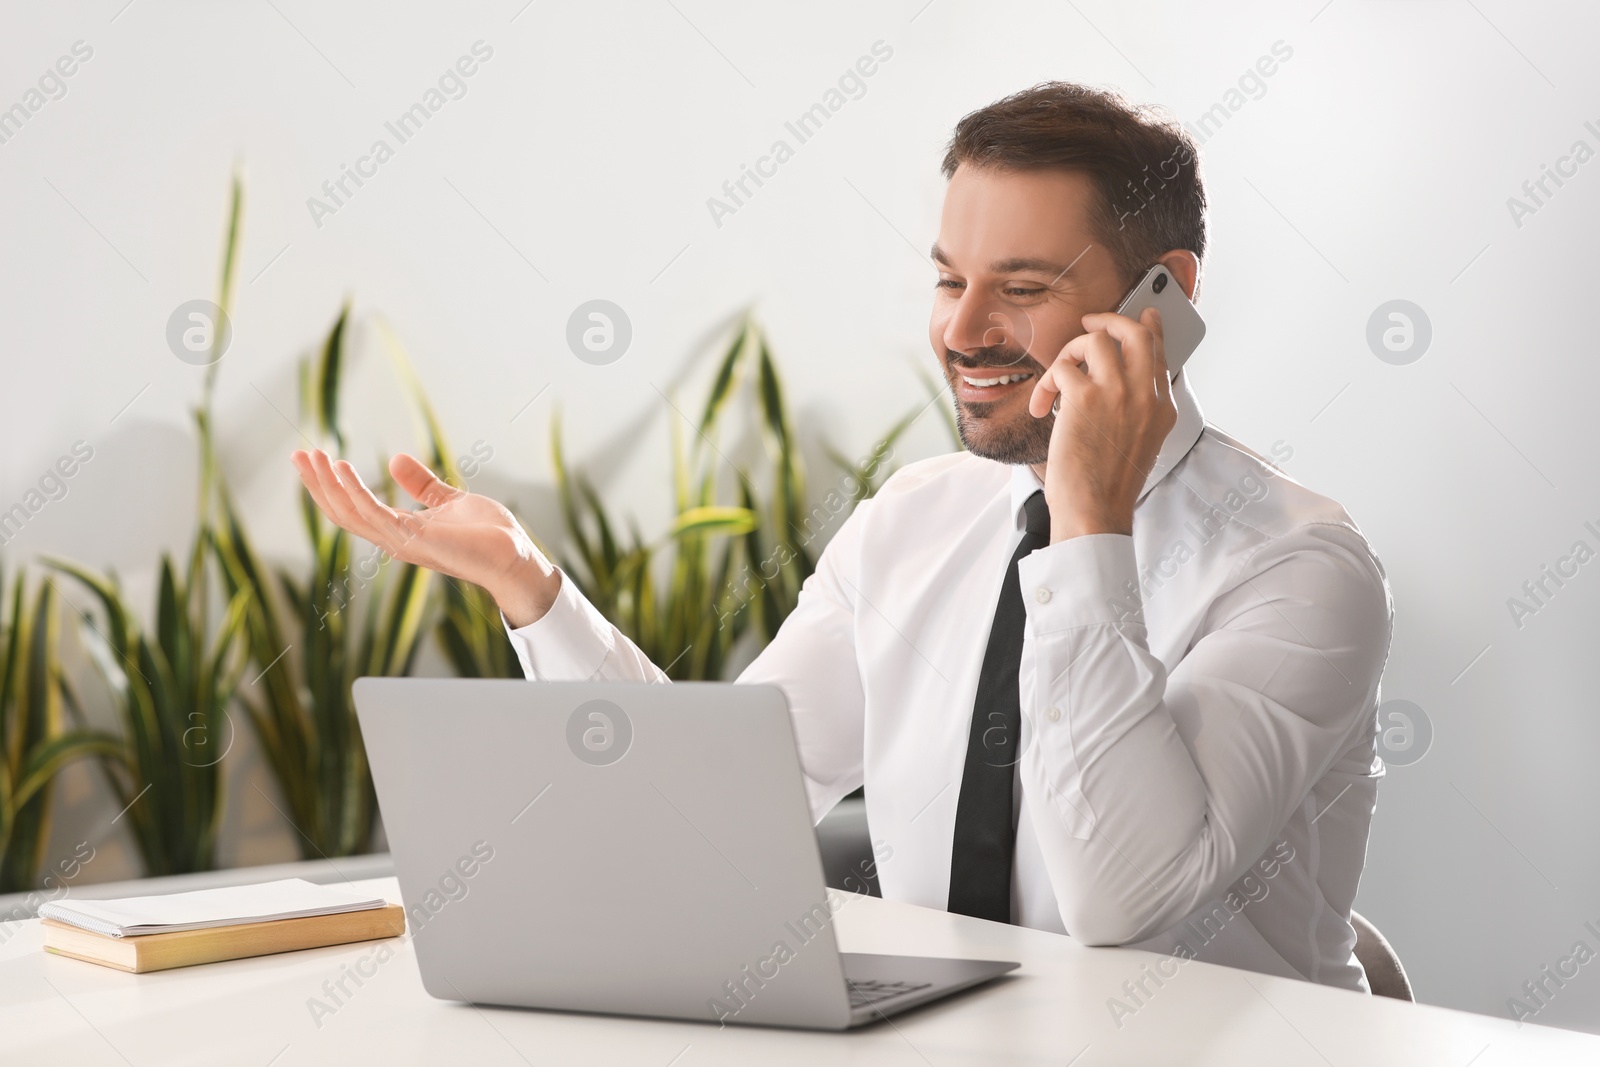 Photo of Happy man using modern laptop while talking on smartphone at desk in office